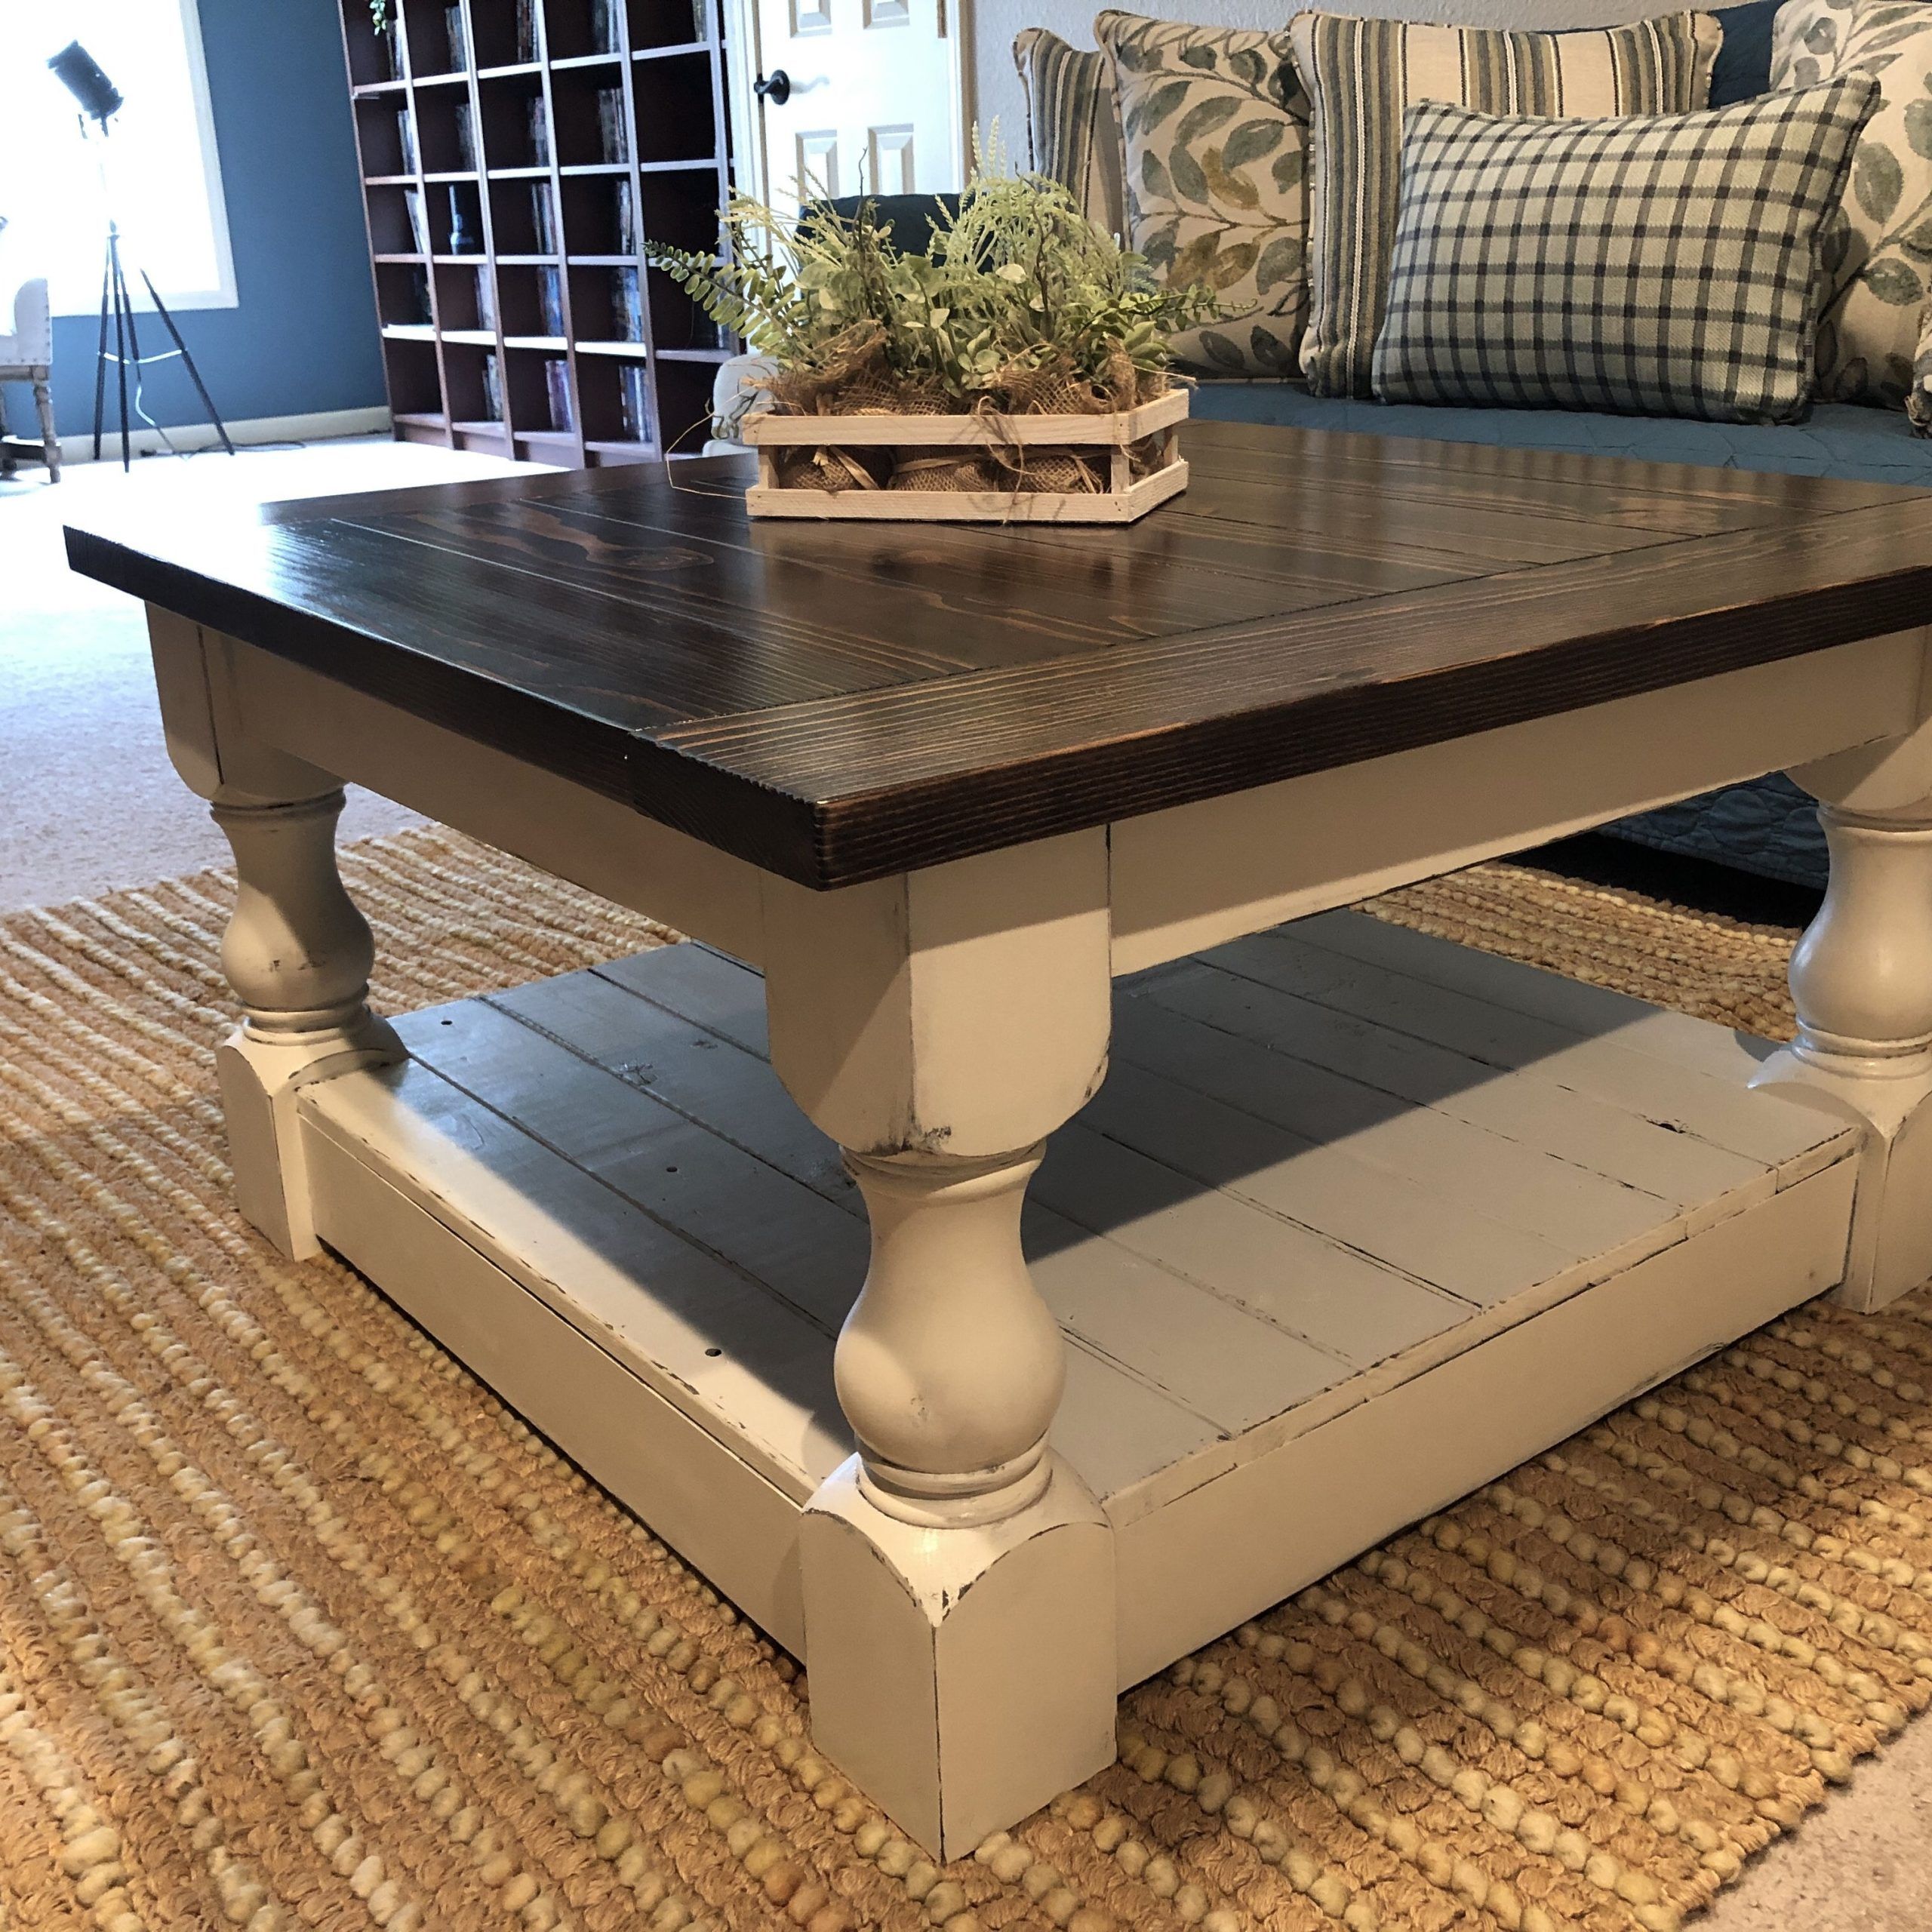 A Perfect Addition To Your Home: The Farmhouse Rustic Coffee Table Regarding Living Room Farmhouse Coffee Tables (Gallery 9 of 20)